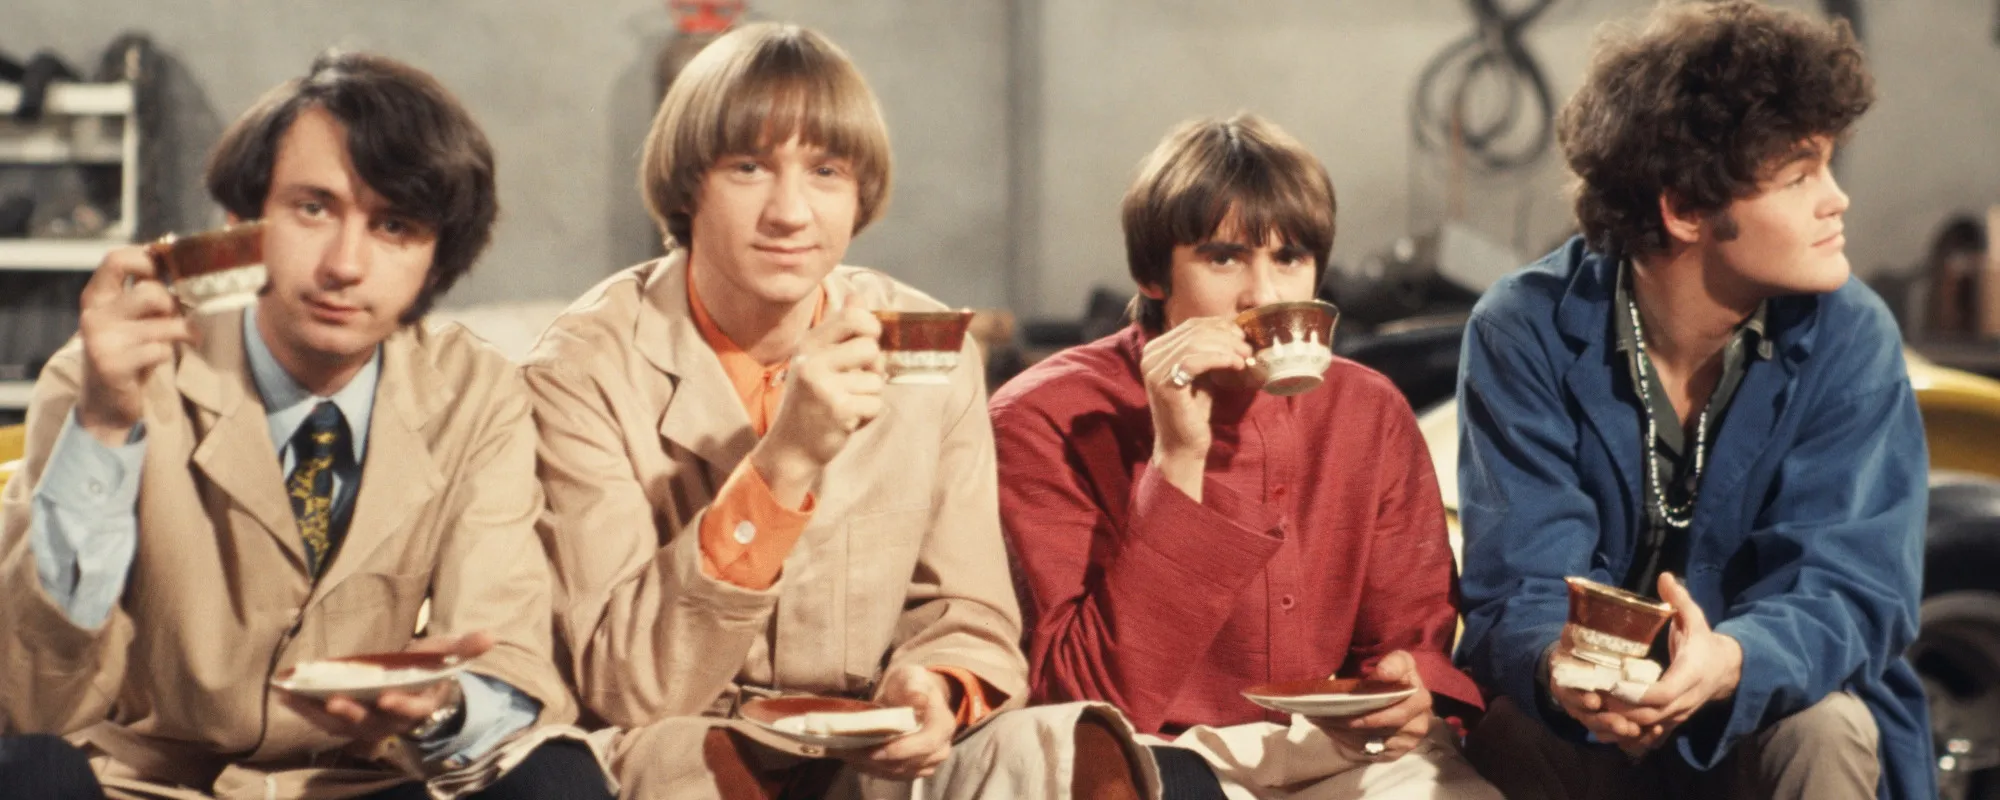 How a B-Side Reached the Top 20: The Story Behind “(I’m Not Your) Steppin’ Stone” by The Monkees